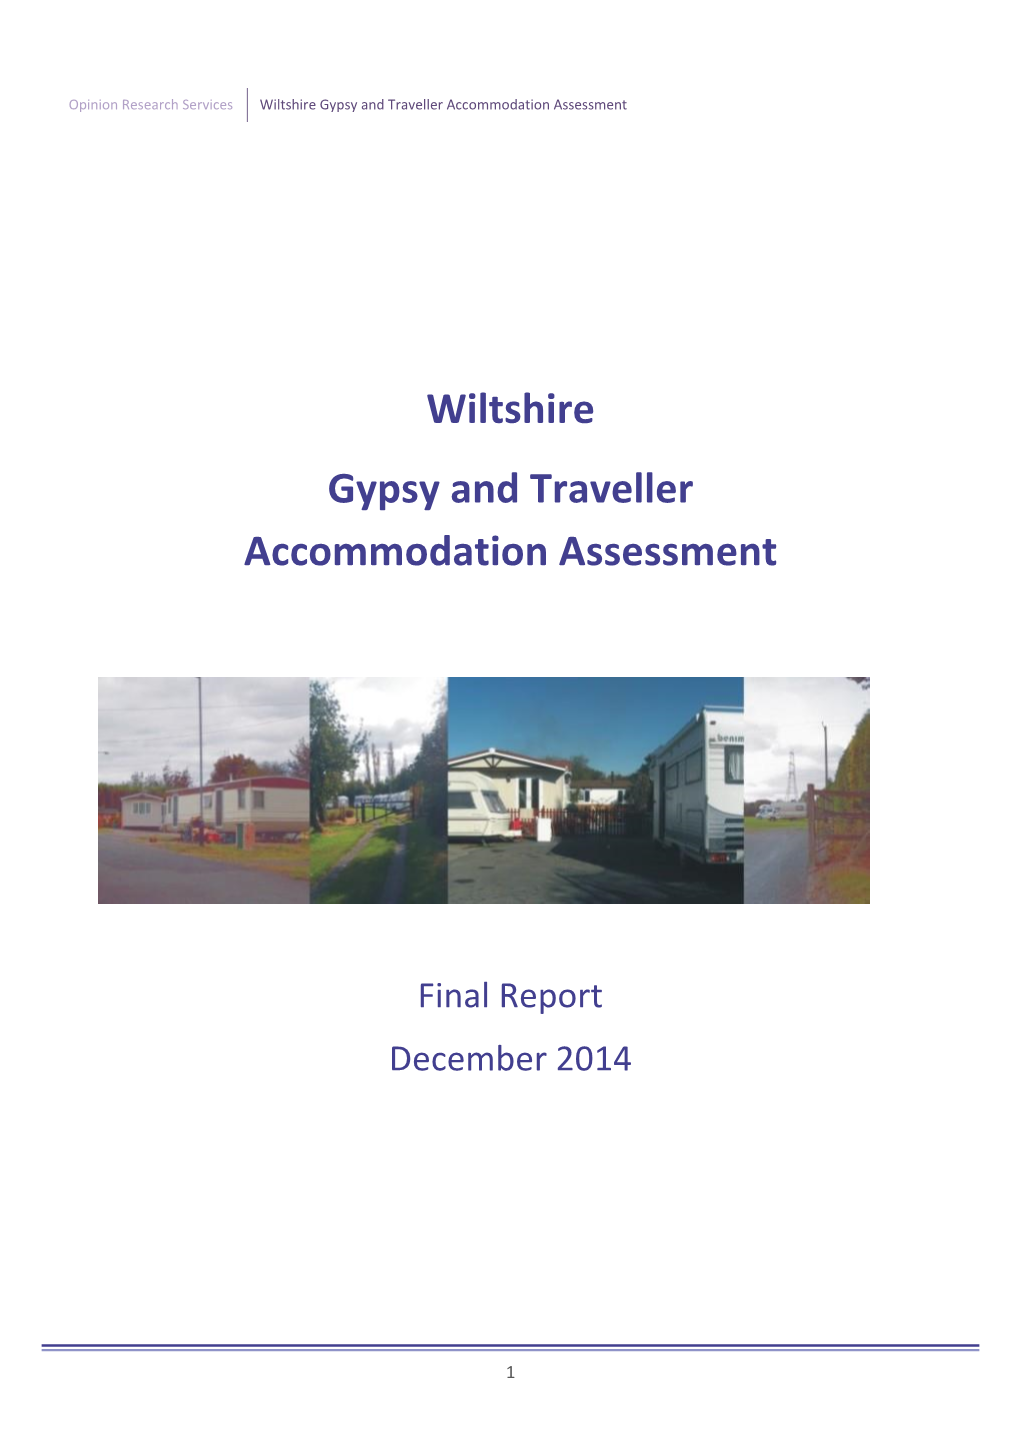 Wiltshire Gypsy and Traveller Accommodation Assessment